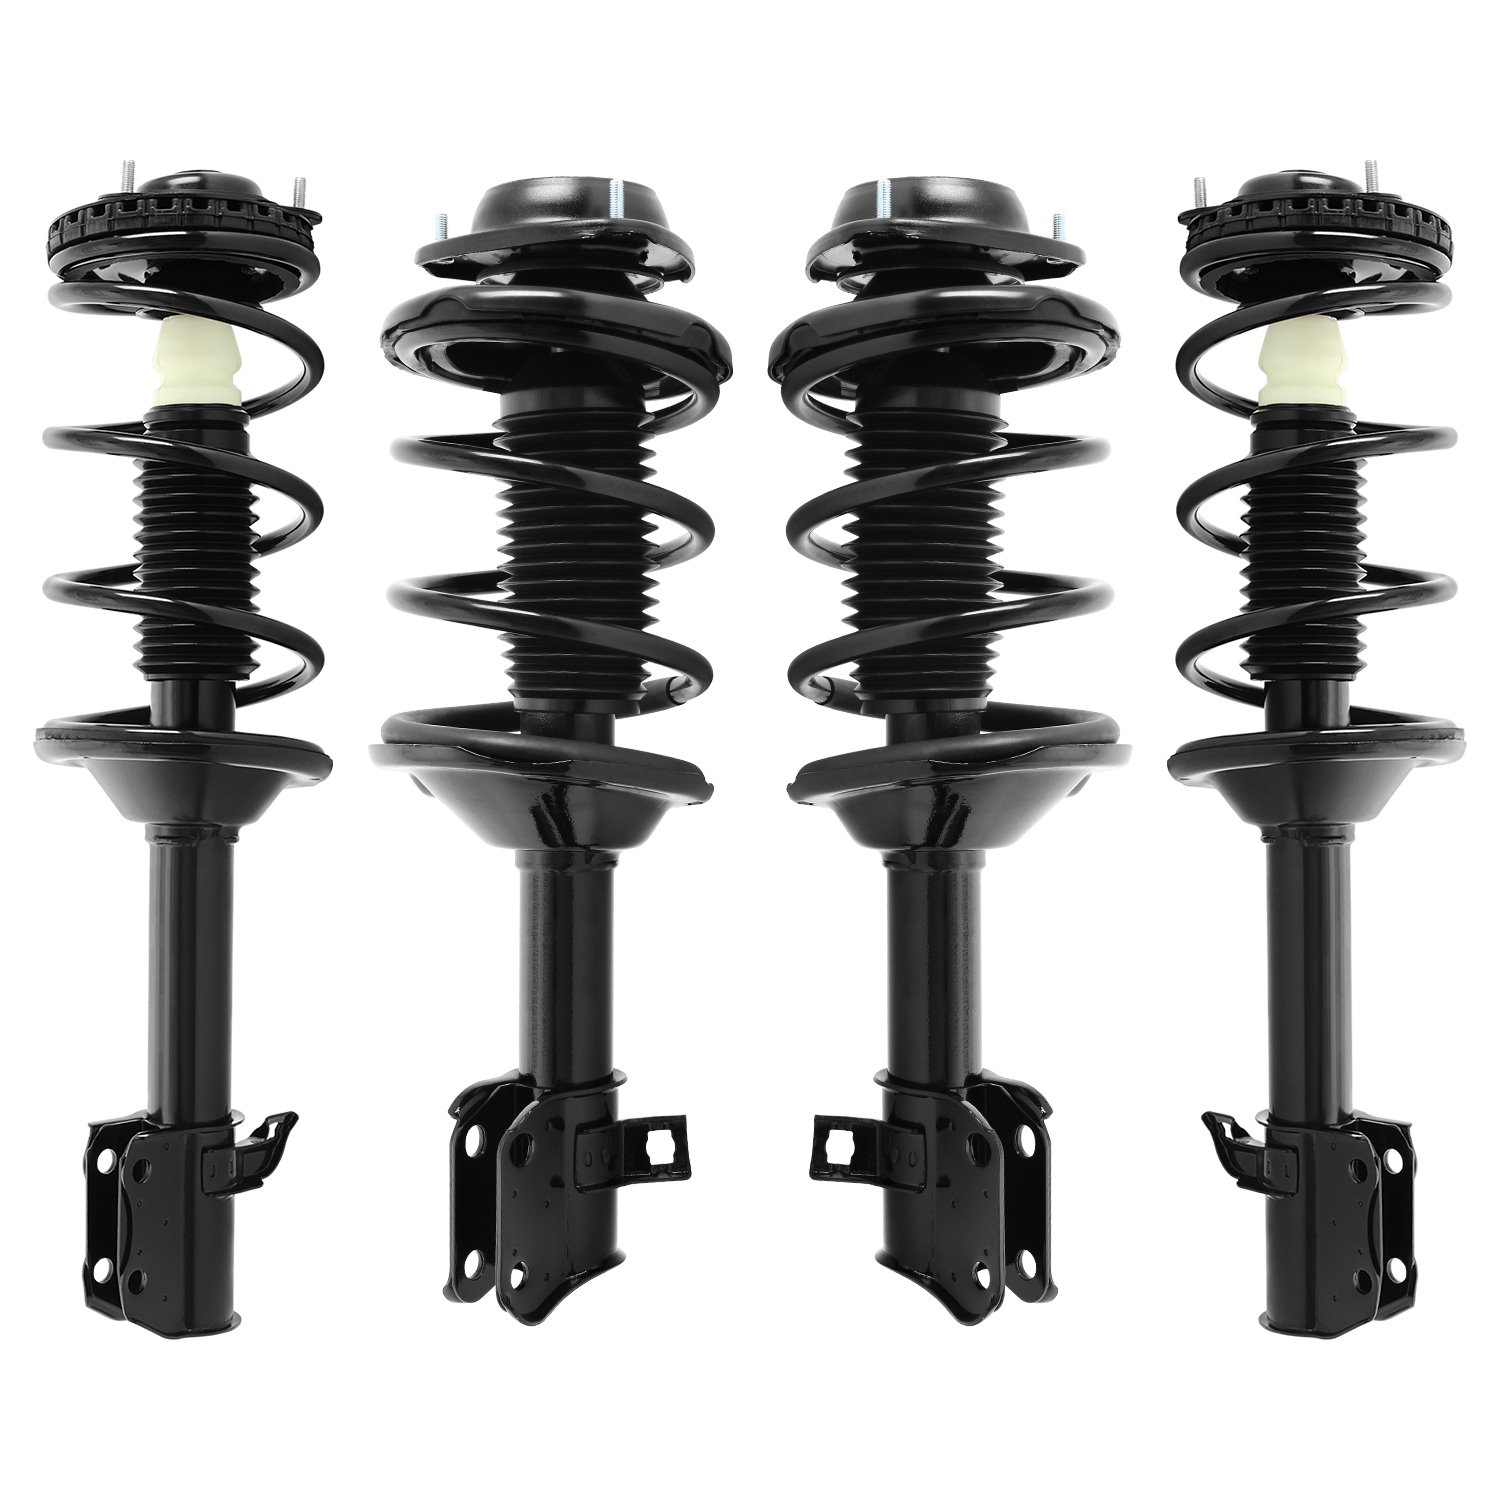 4-11863-15913-001 Front & Rear Suspension Strut & Coil Spring Assembly Kit Fits Select Subaru Legacy